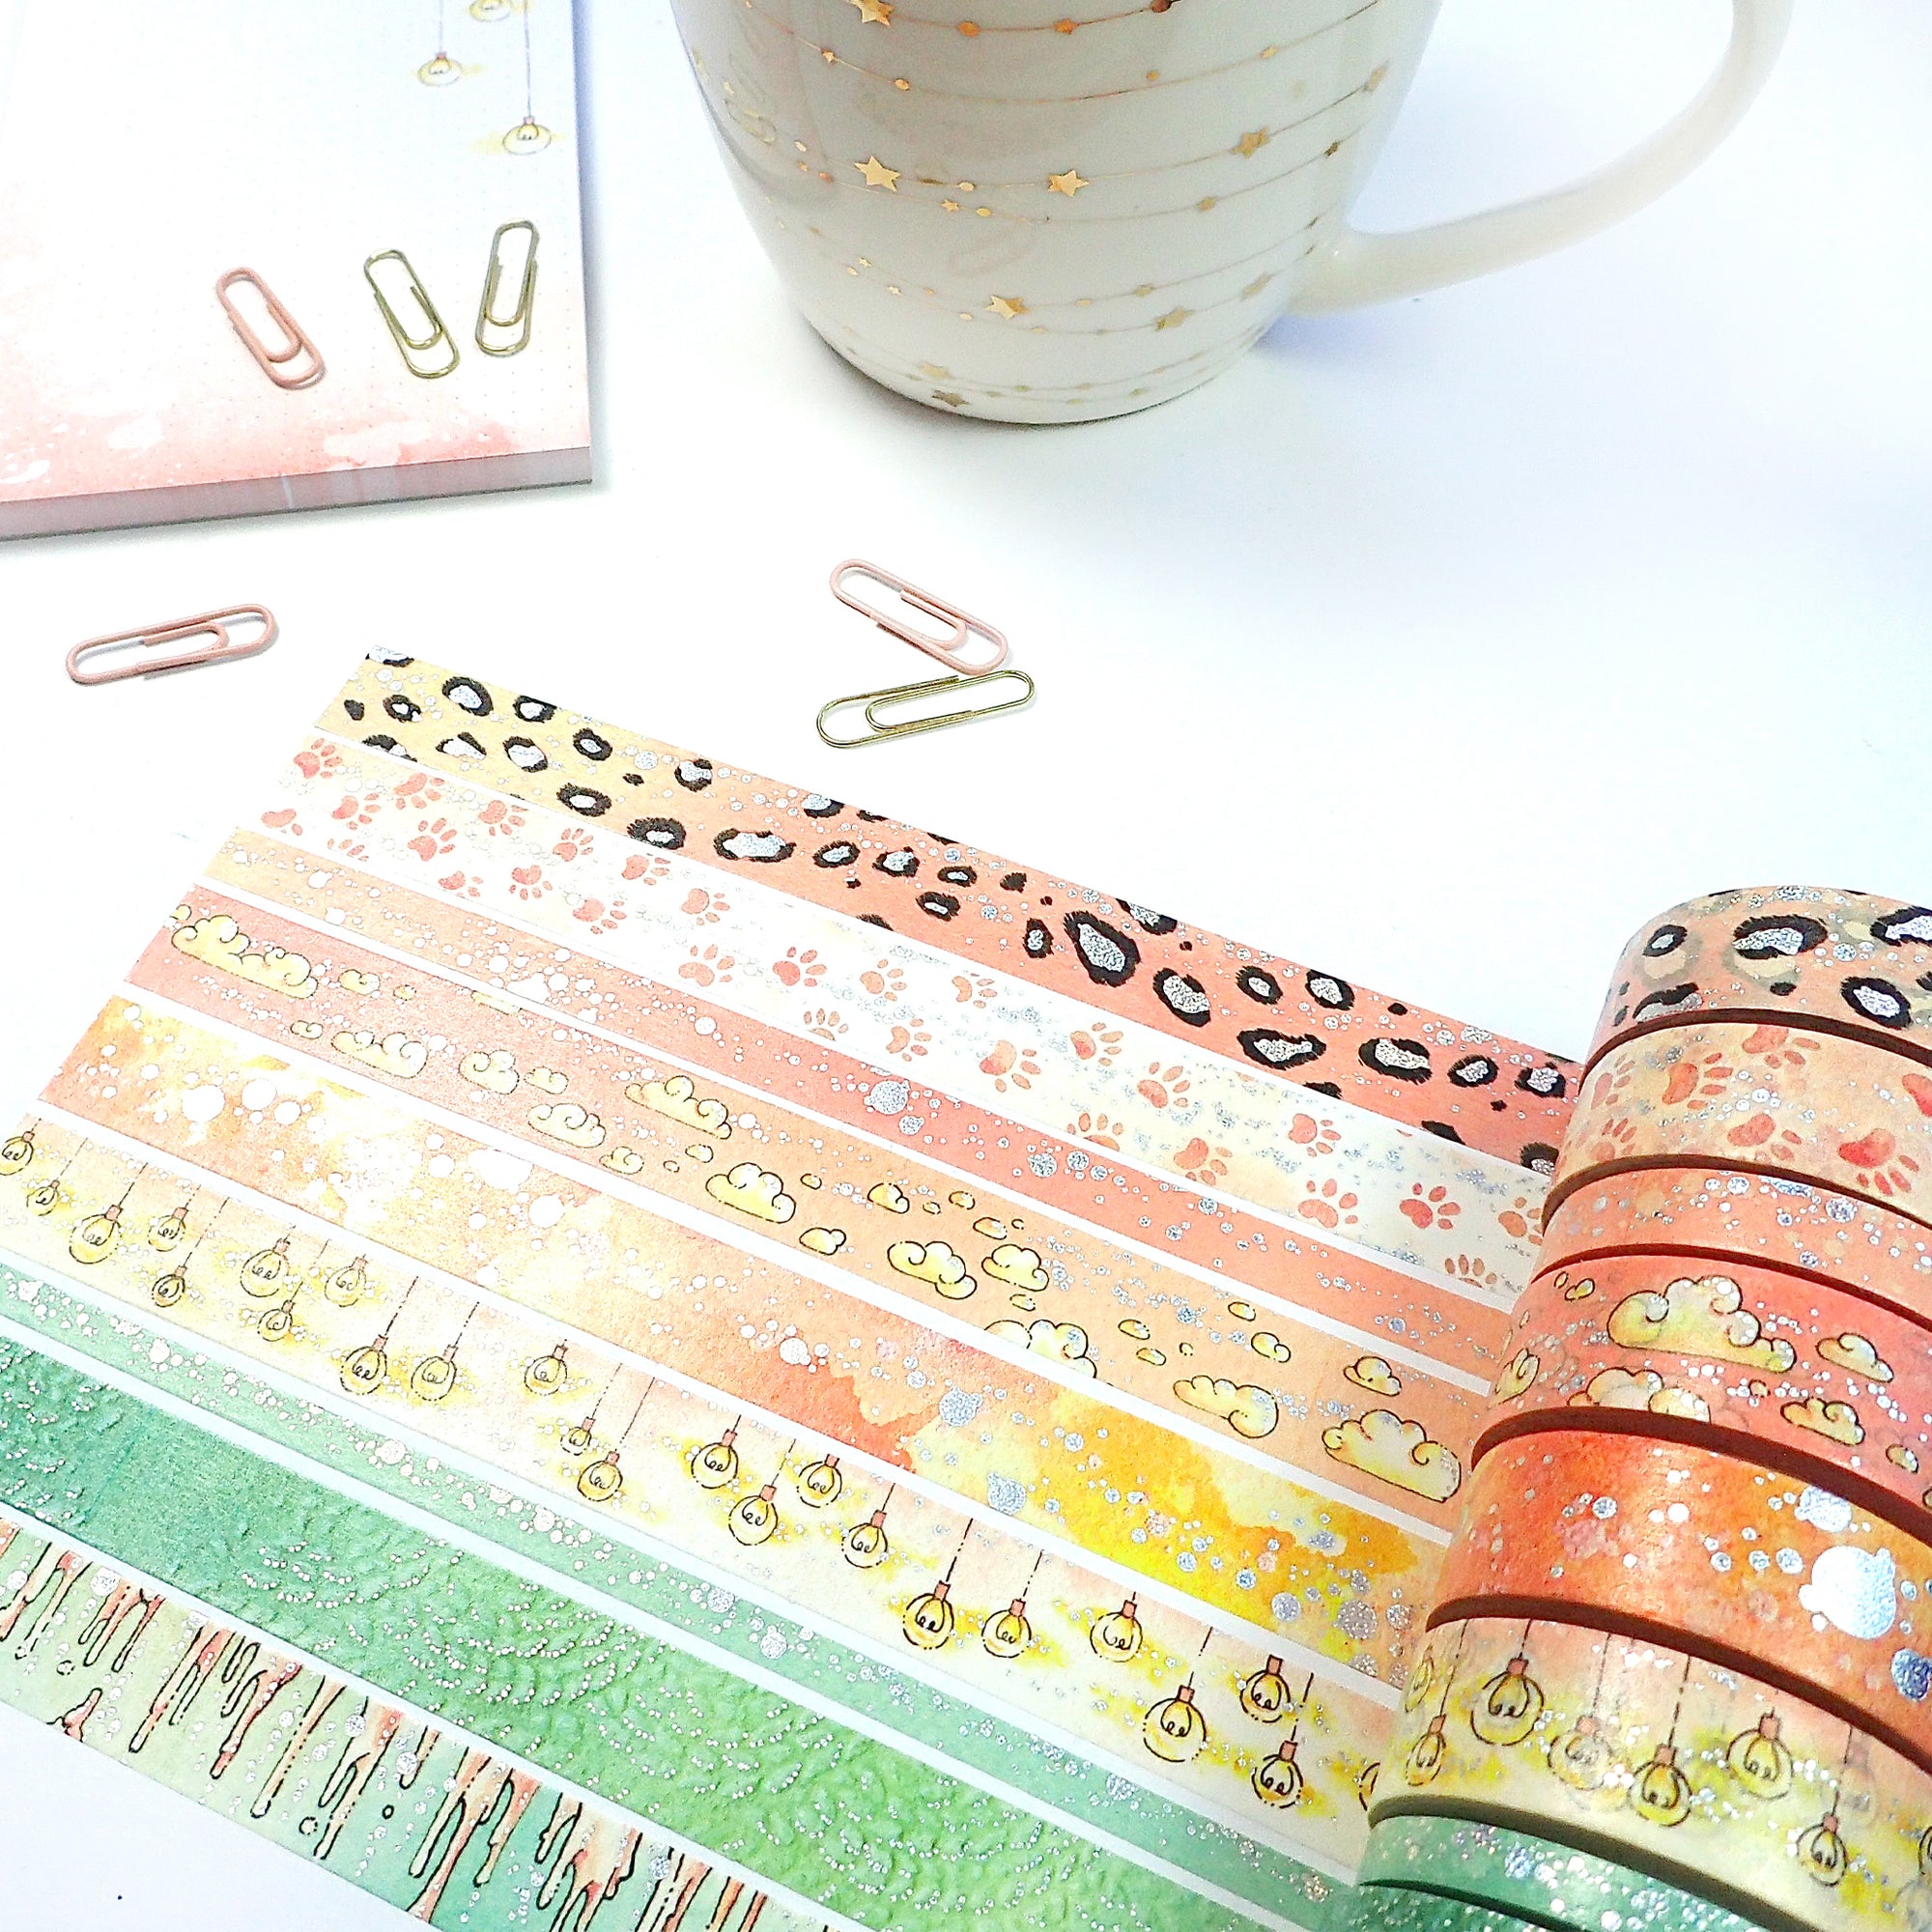 Watercolor washi tape with pink leopard and foiled details